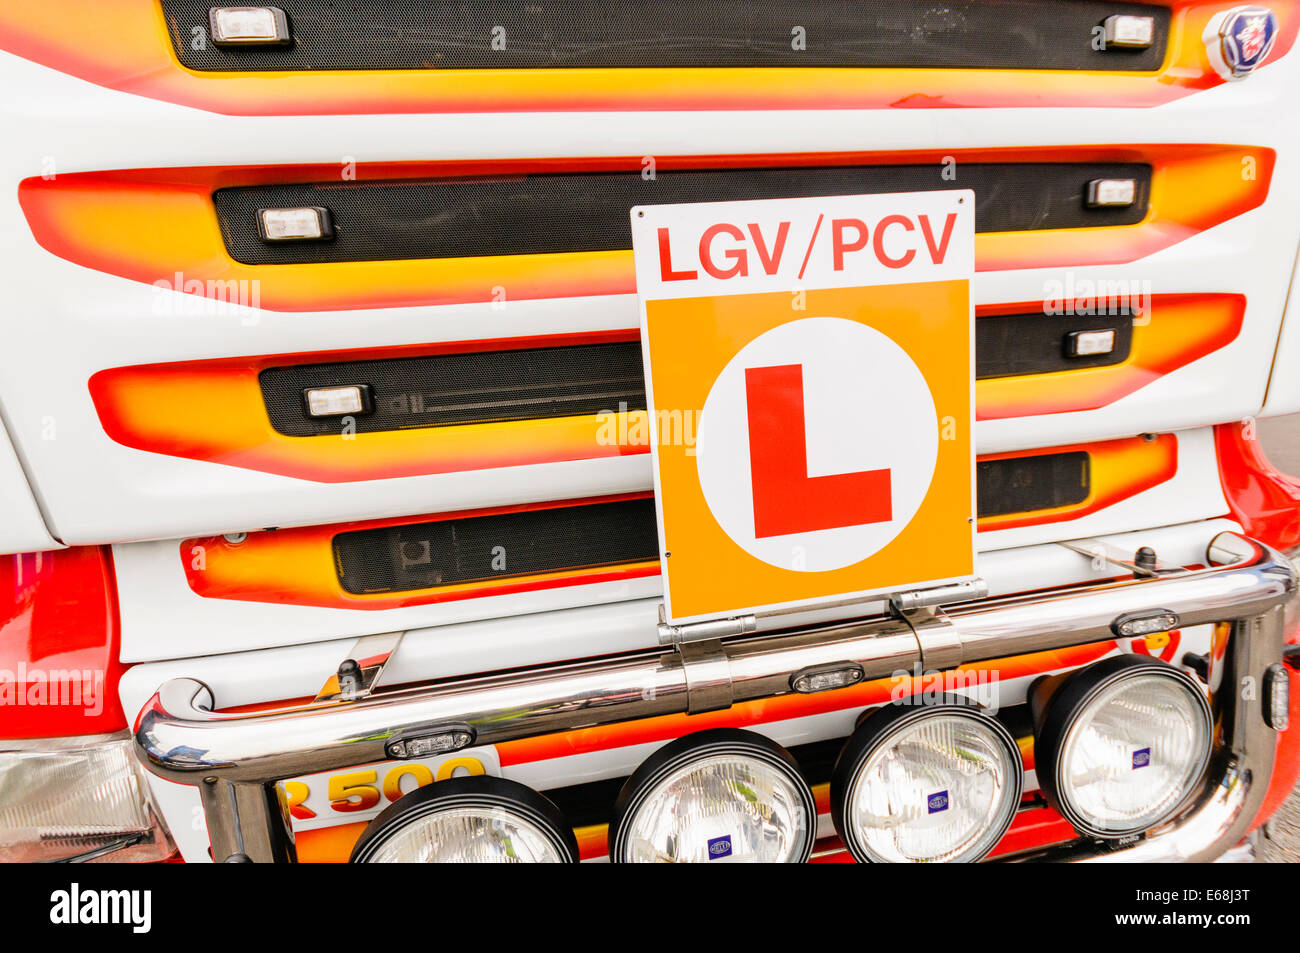 A colourful Scania semi articulated tractor cab with a learner LGV PGV badge. Stock Photo